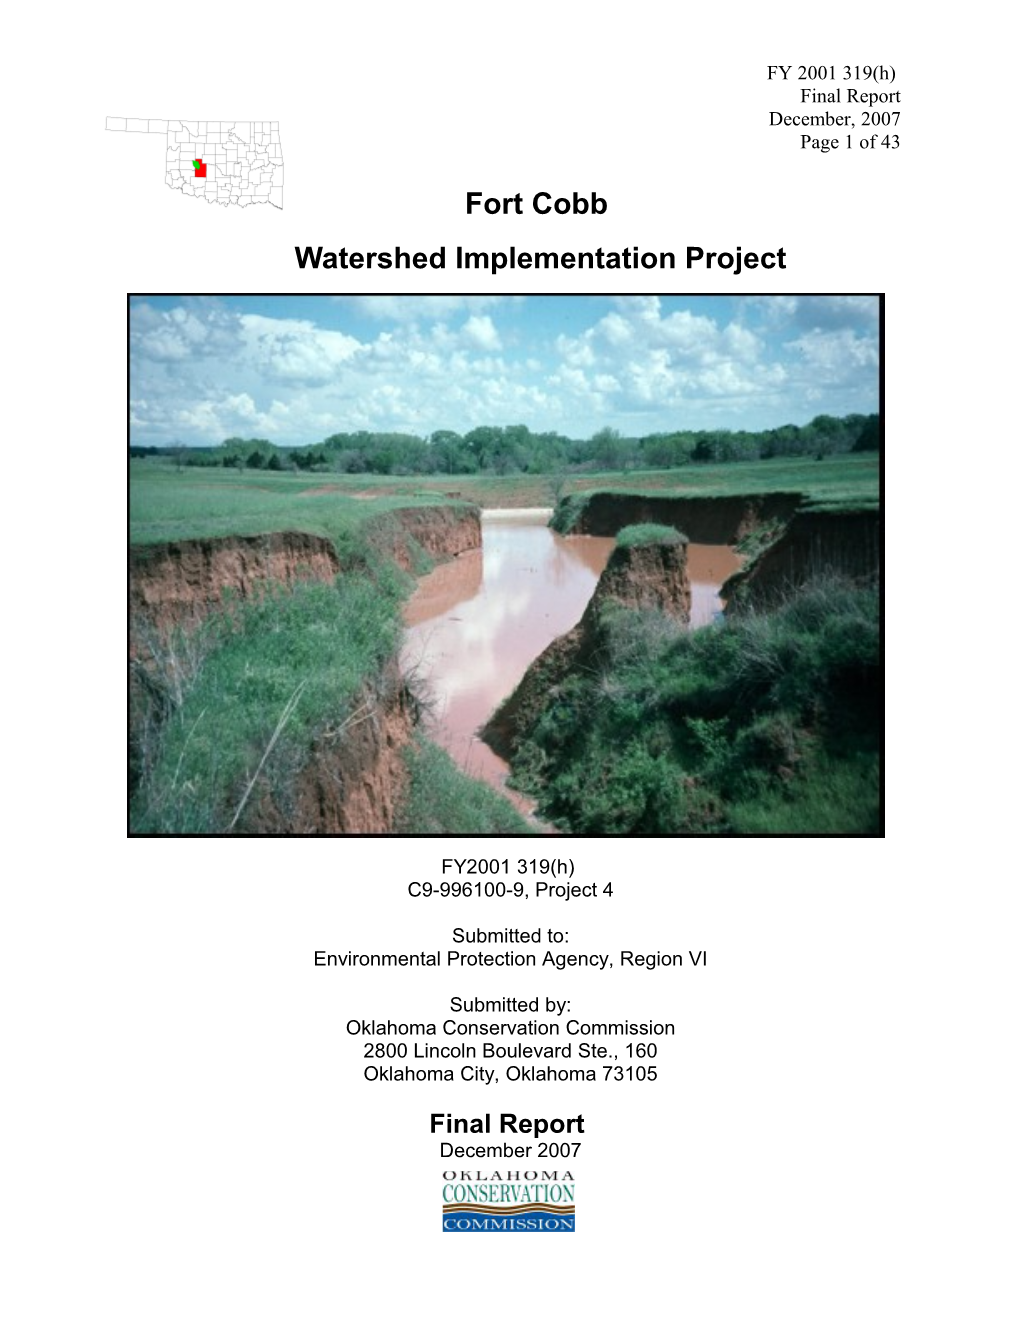 Watershed Implementation Project